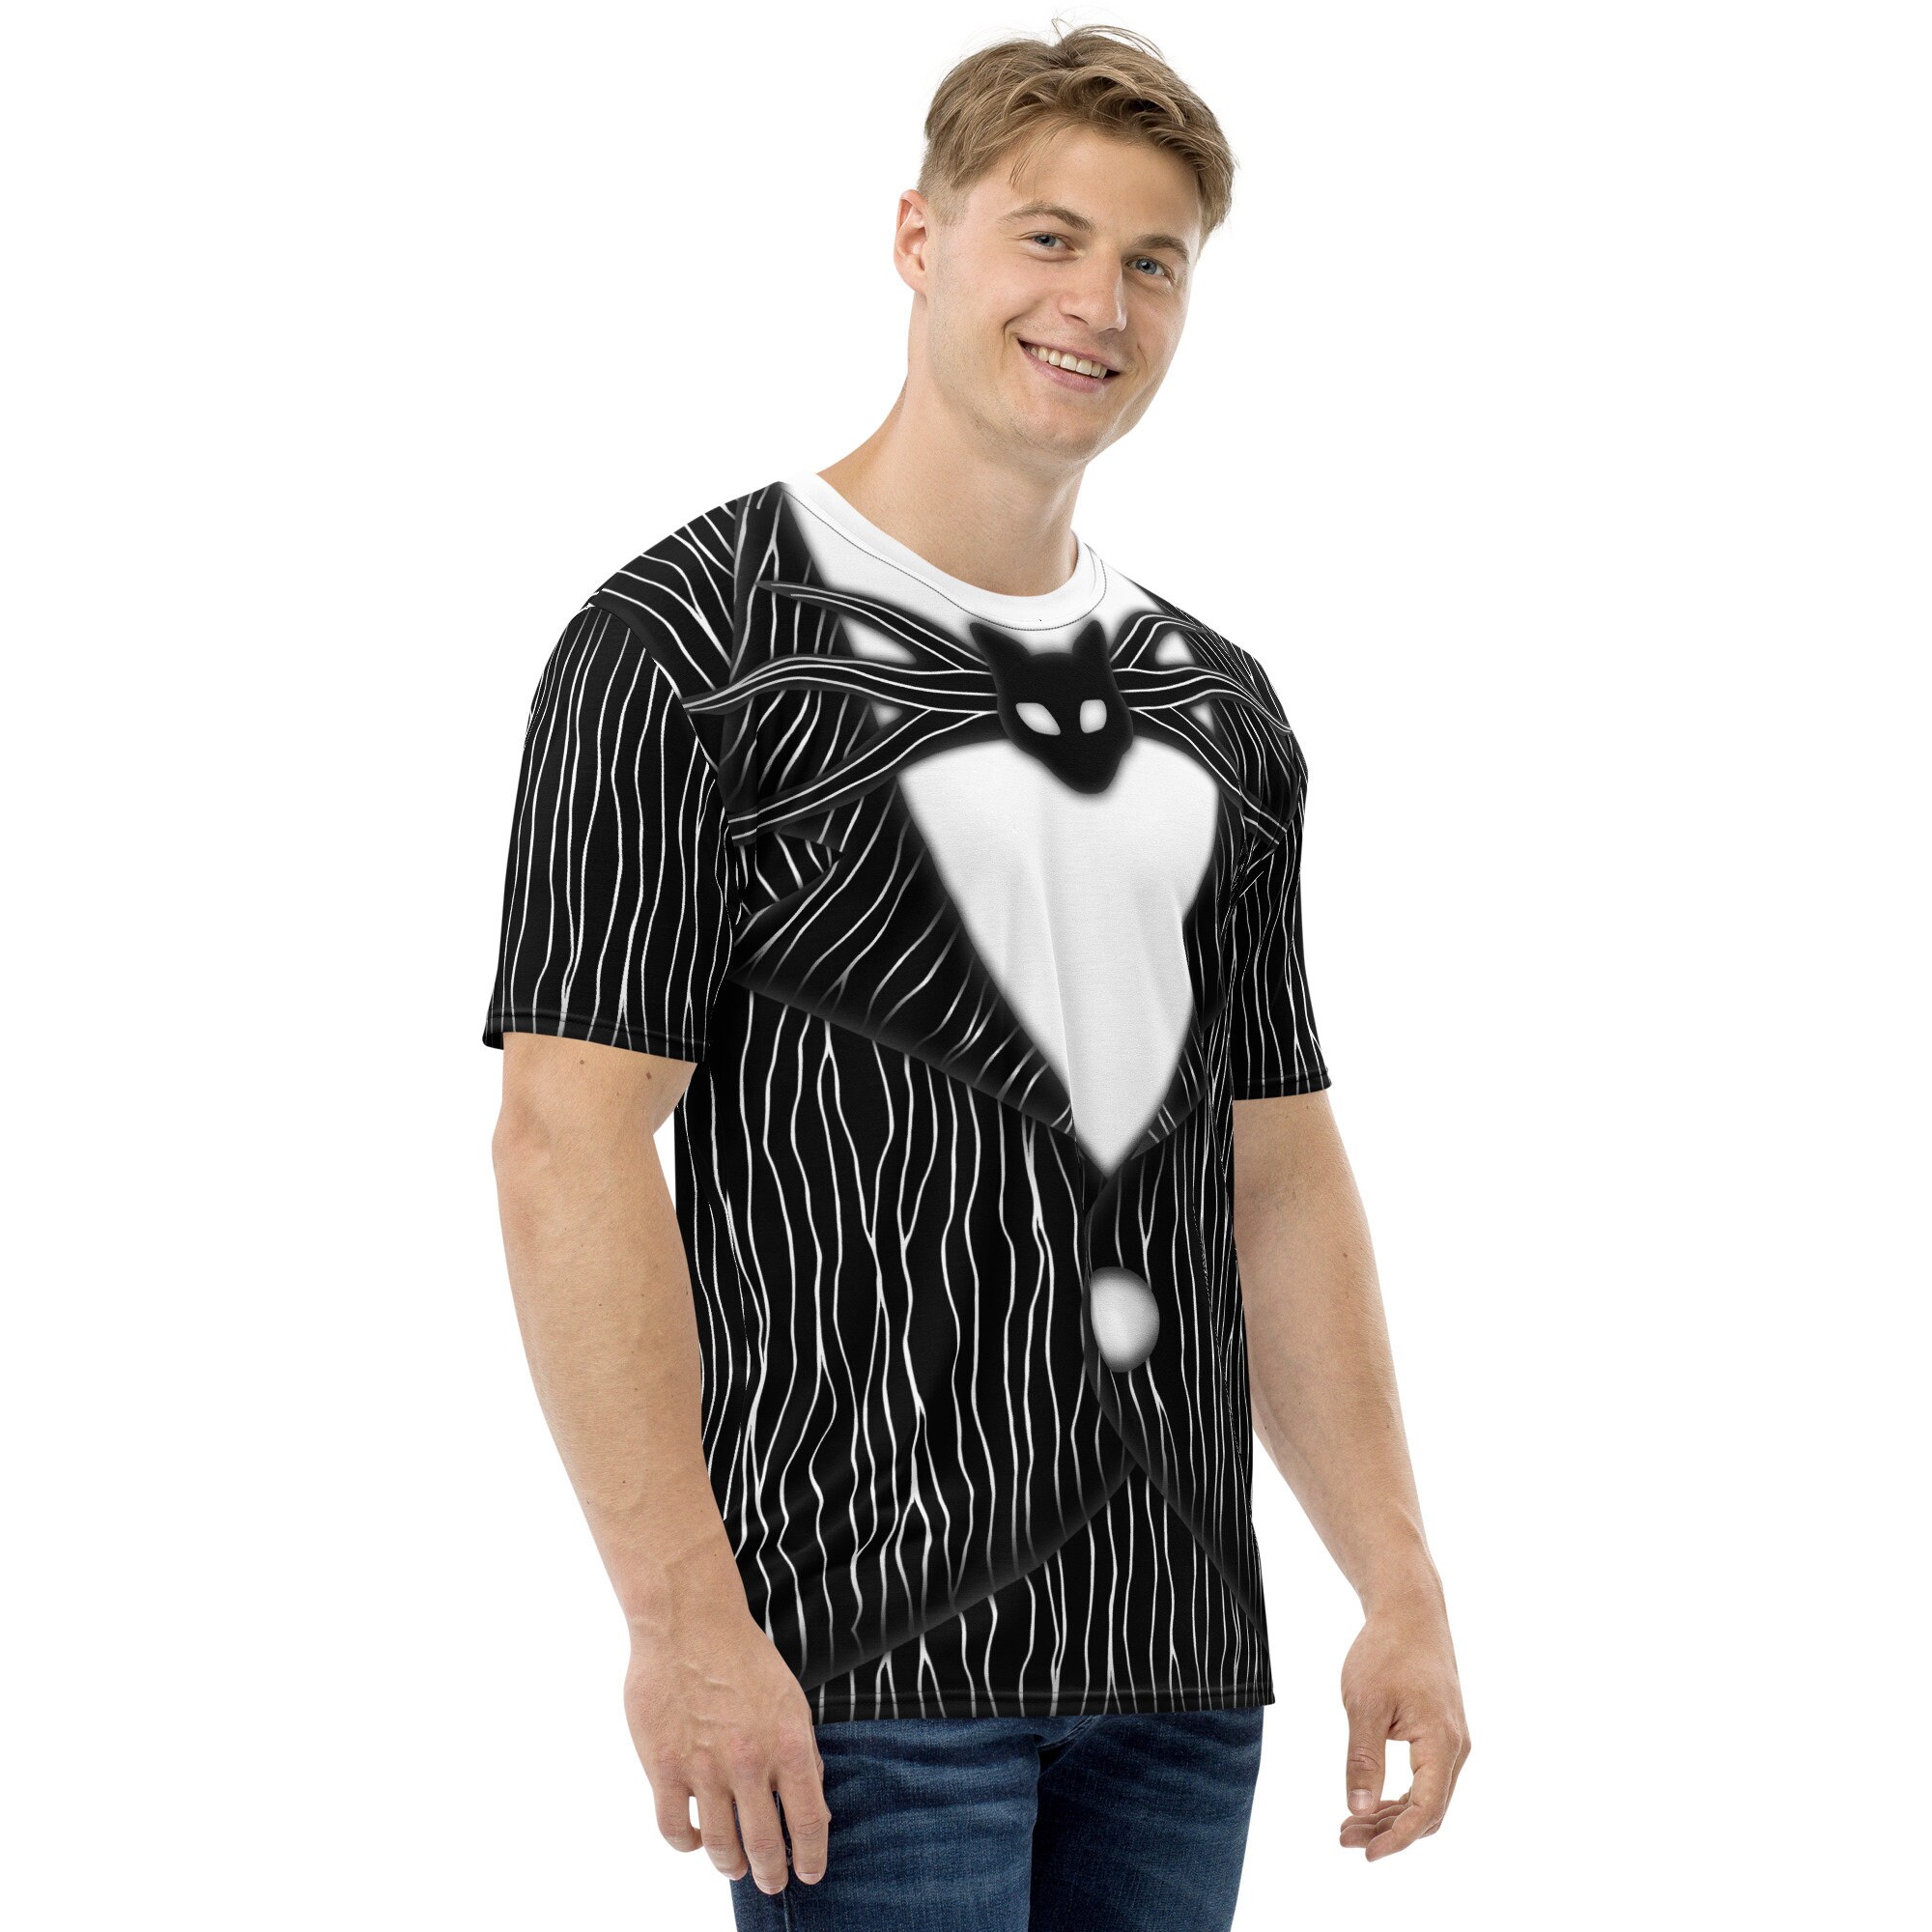 Jack Skellington Inspired T-Shirt - The Nightmare Before Christmas - Cosplay 3D Shirt